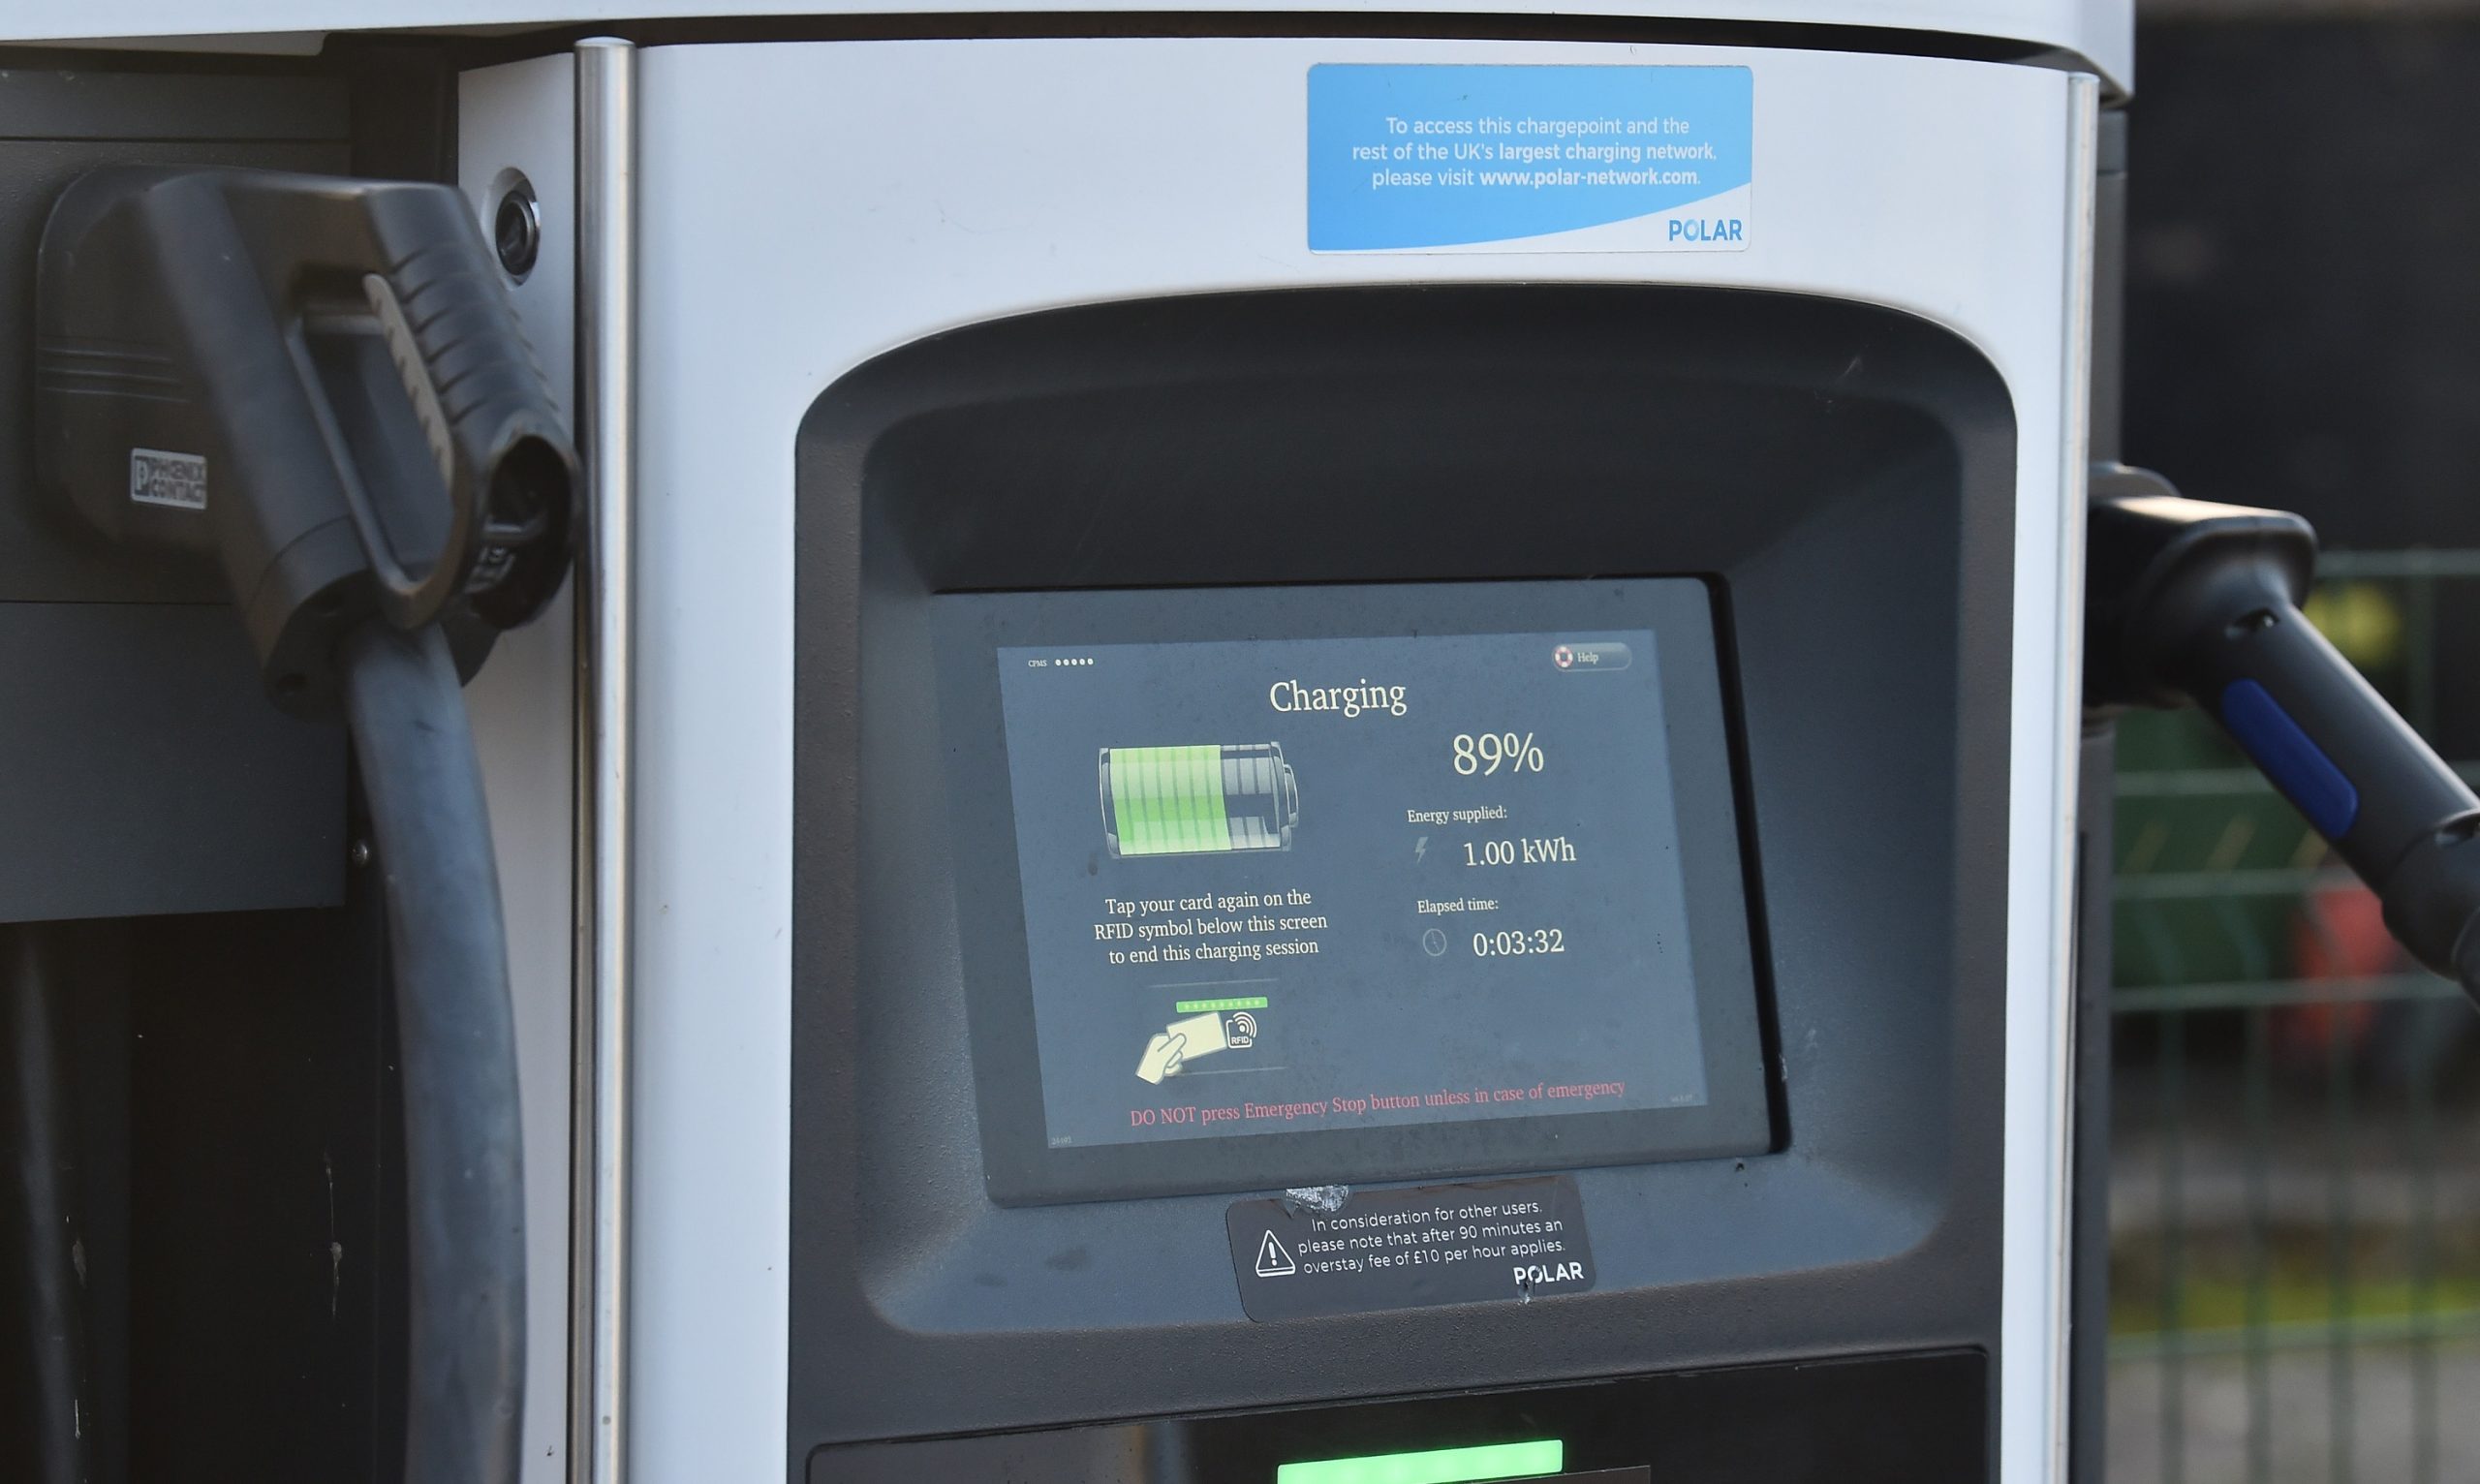 A display showing the current charging status of an EV